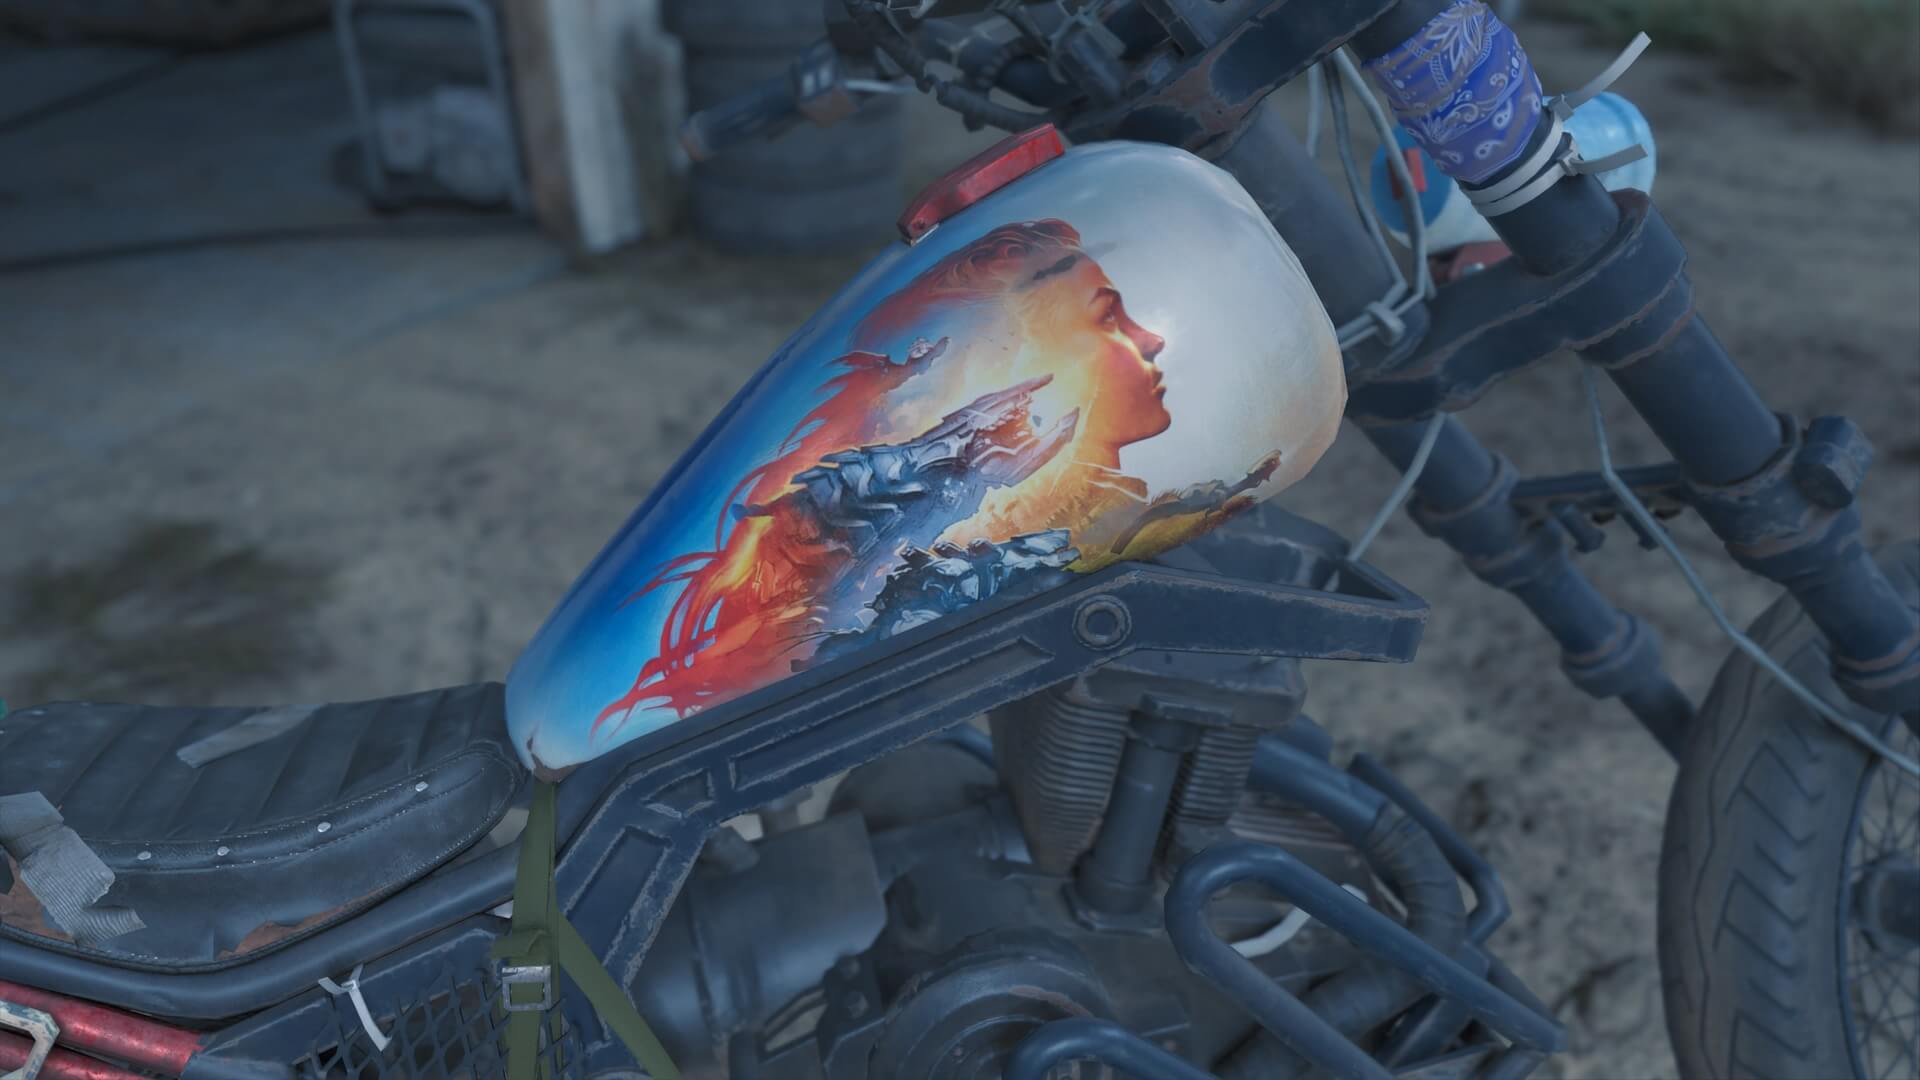 a motorbike with the fuel tank featuring a Horizon Zero Dawn design